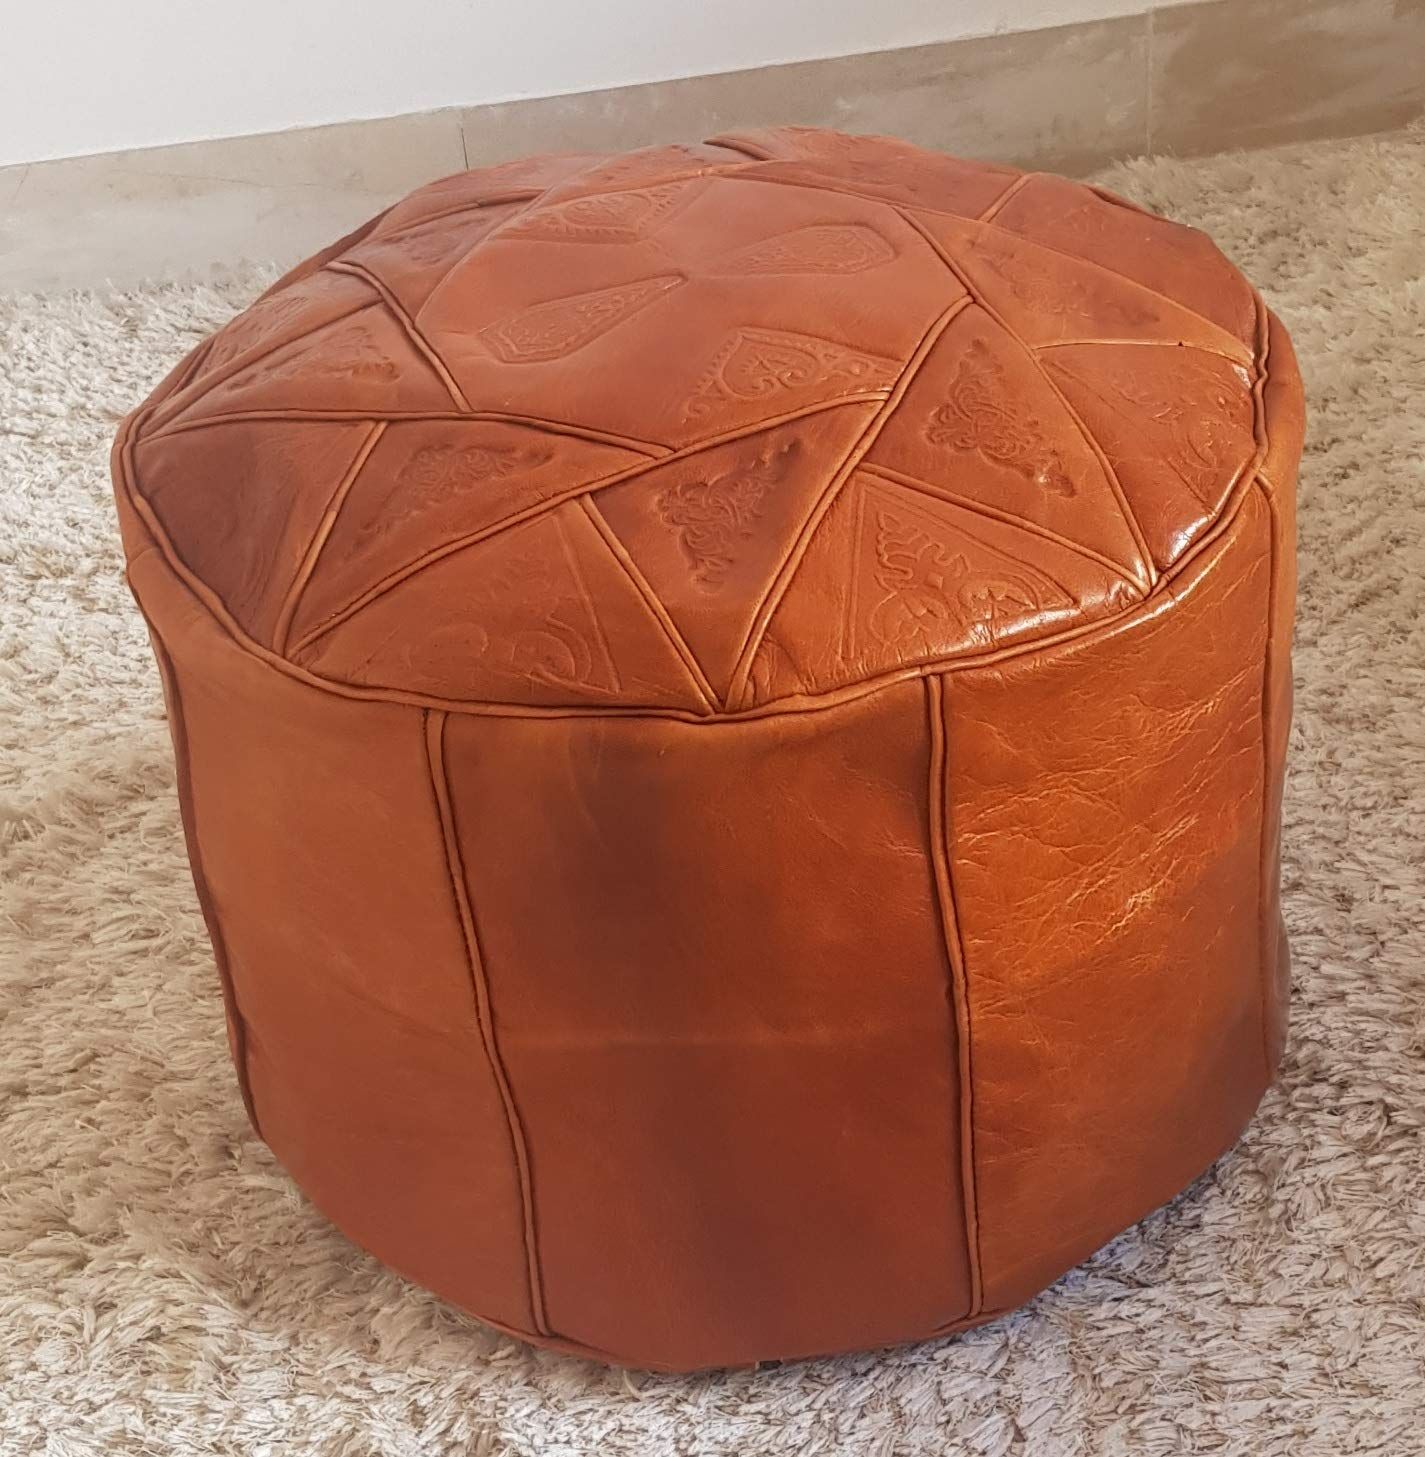 Cube Moroccan Leather Pouf, Brown | Handmadology With Regard To Brown Moroccan Inspired Pouf Ottomans (View 8 of 20)